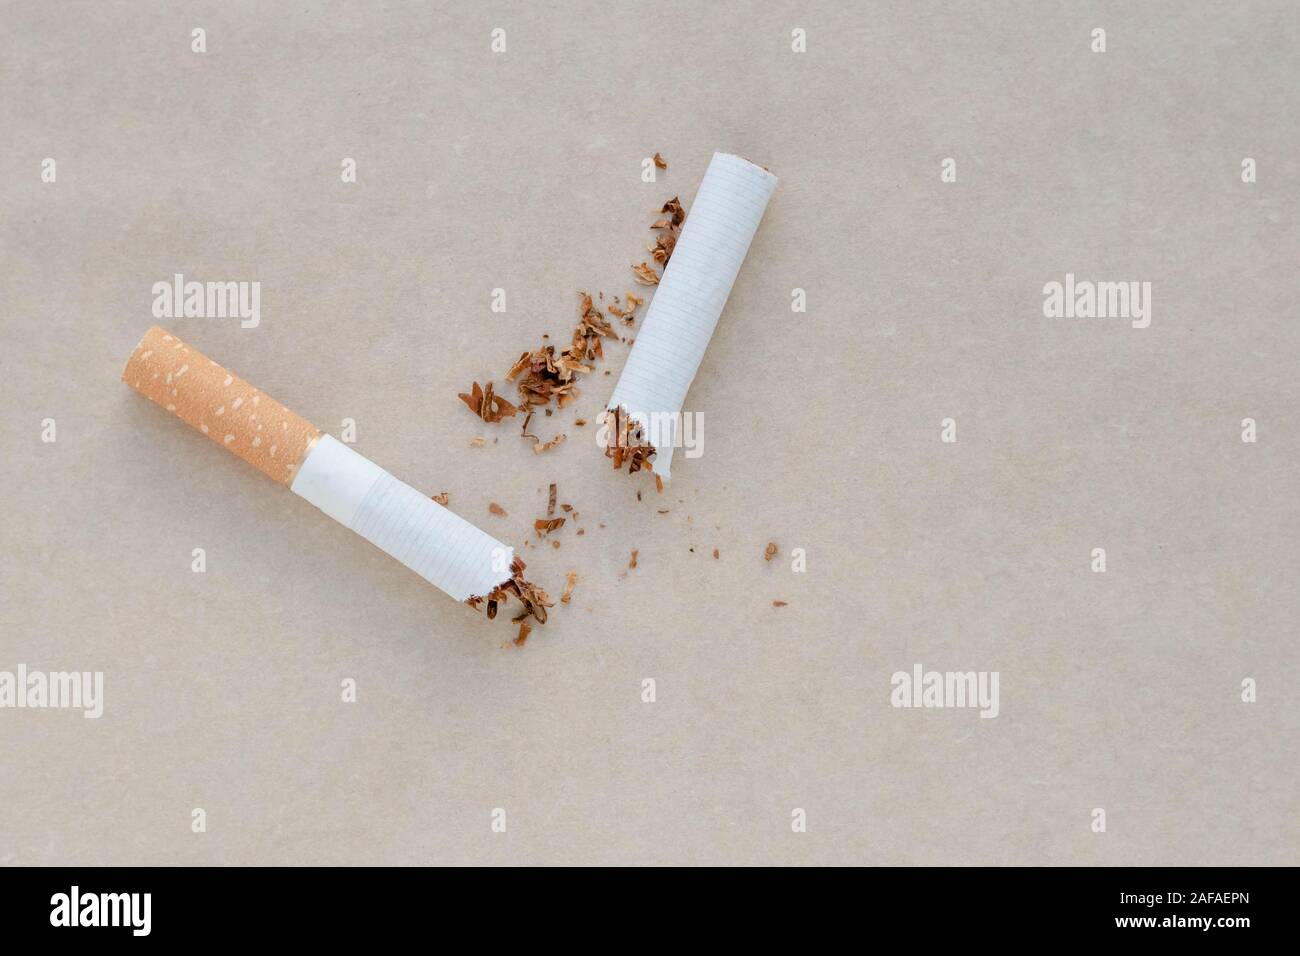 A broken cigarette on a light brown paper background. Scattered tobacco. Copy, text space. Bad habit. Say no to addiction. Healthy lifestyle concept Stock Photo